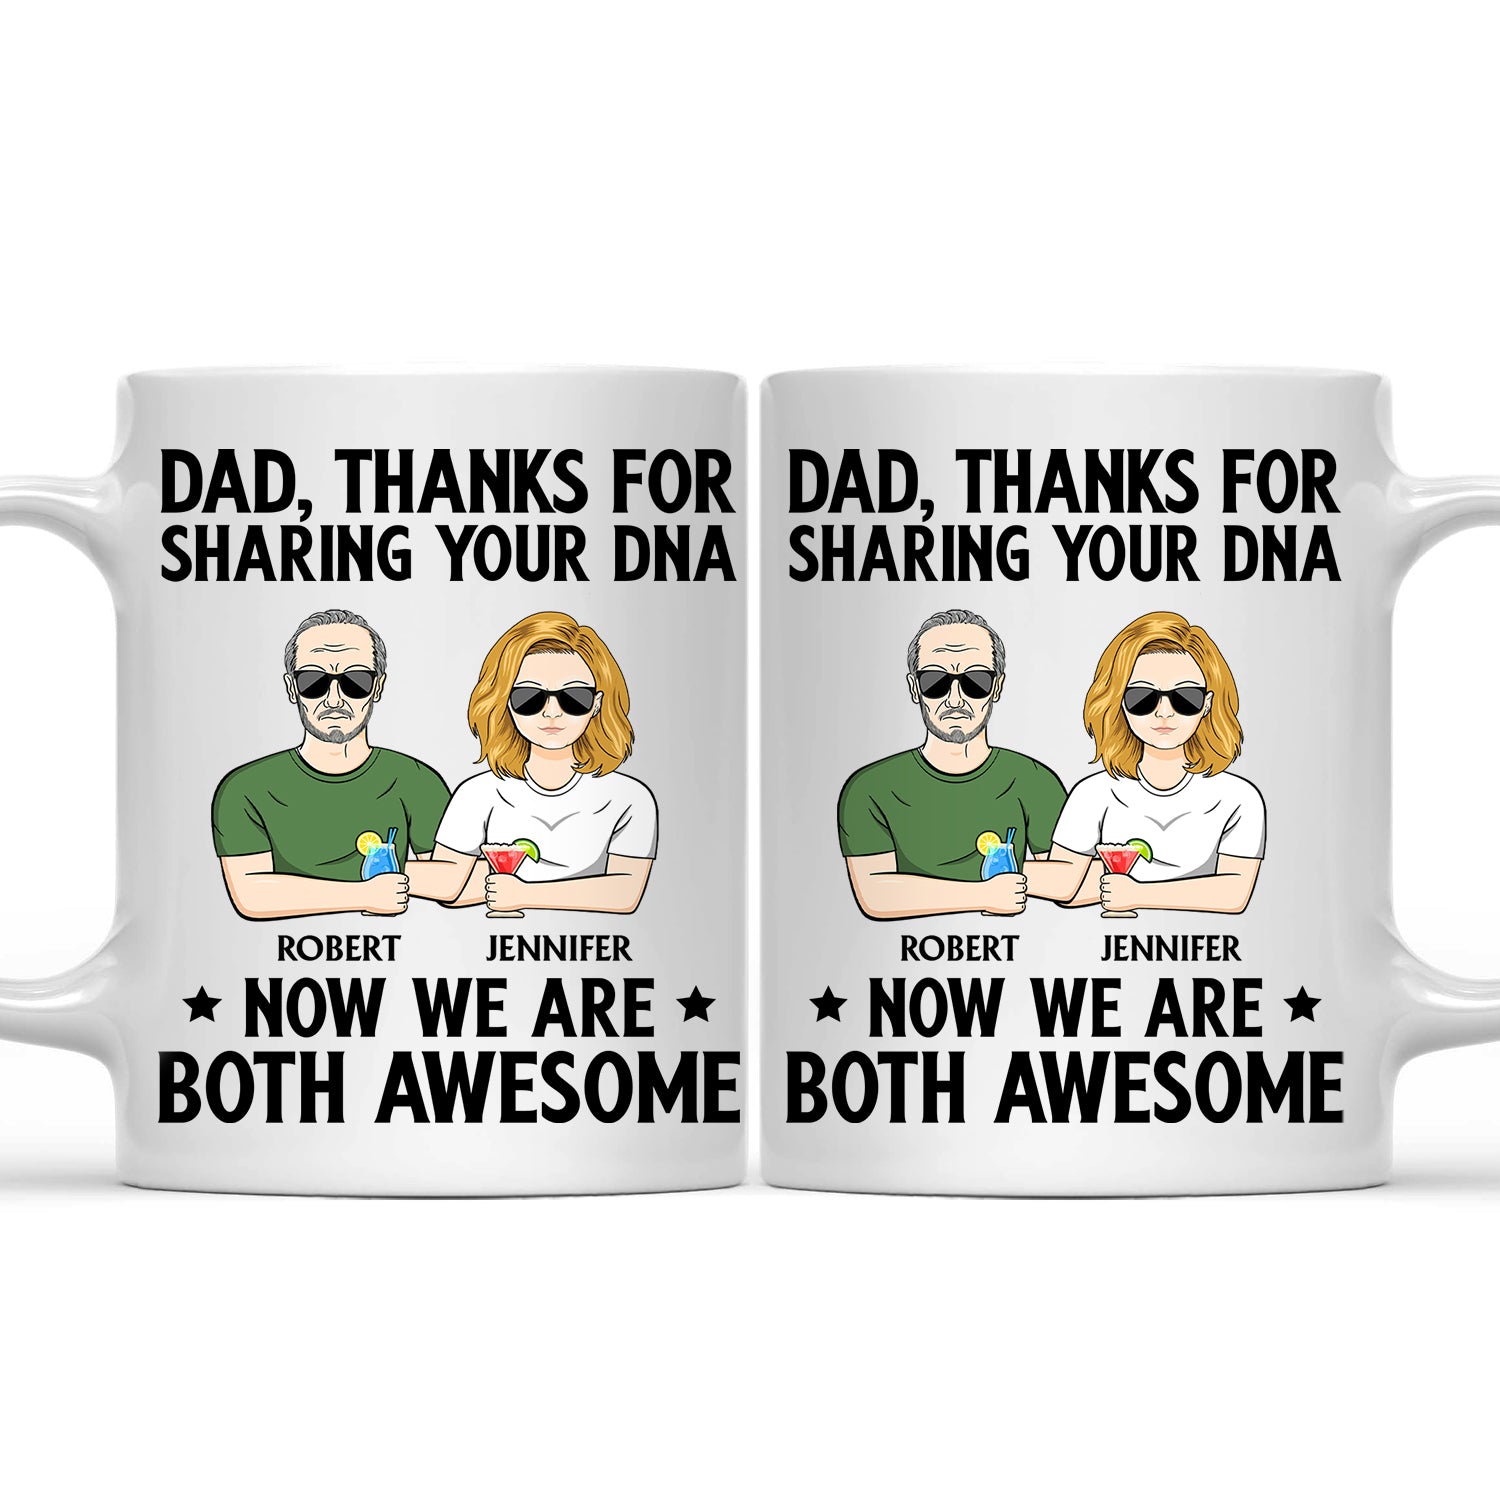 Dad Thanks For Sharing Your DNA - Personalized Mug